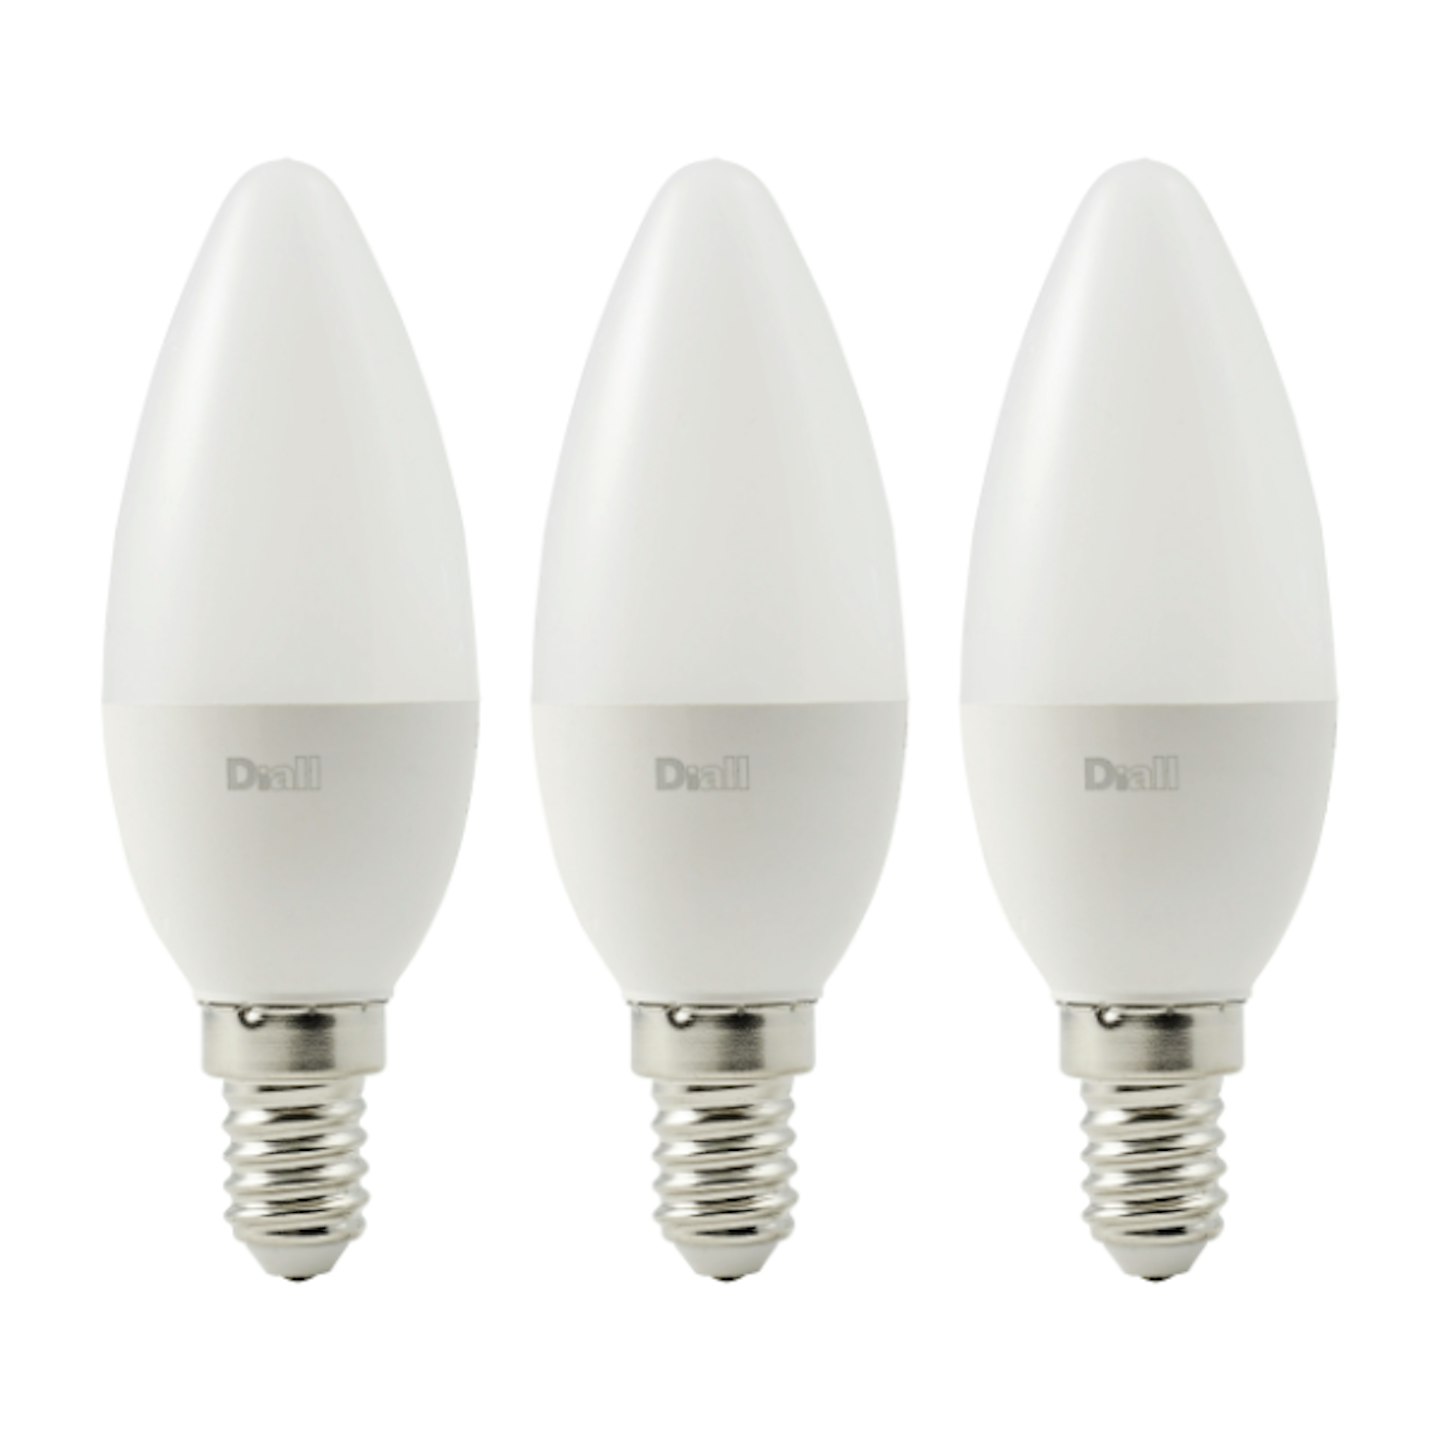 Diall Candle Warm White Led Light Bulb (3 Pack)